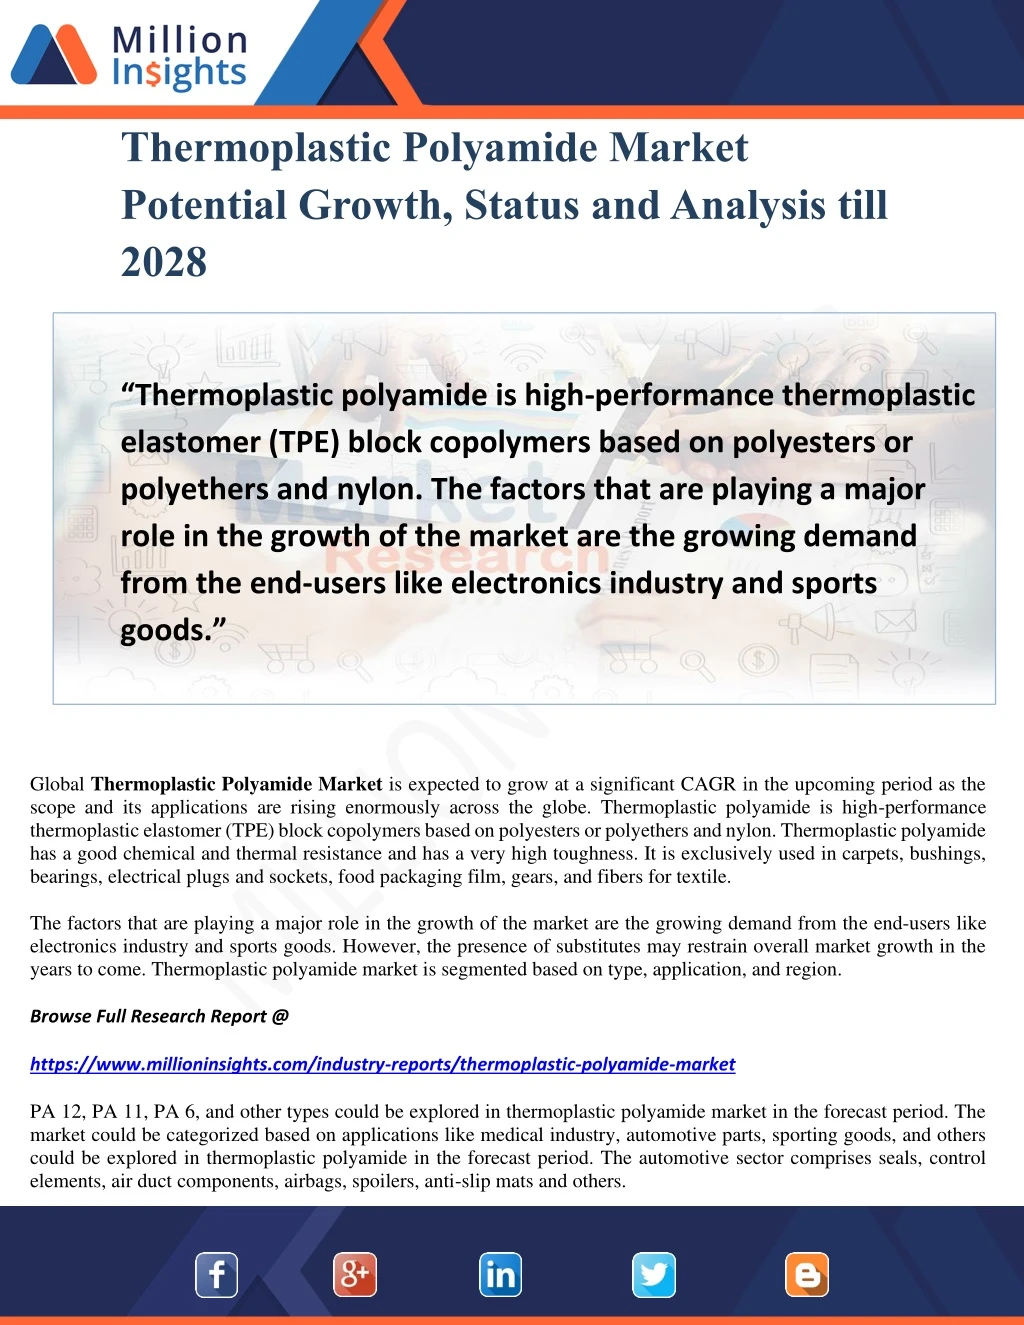 thermoplastic polyamide market potential growth